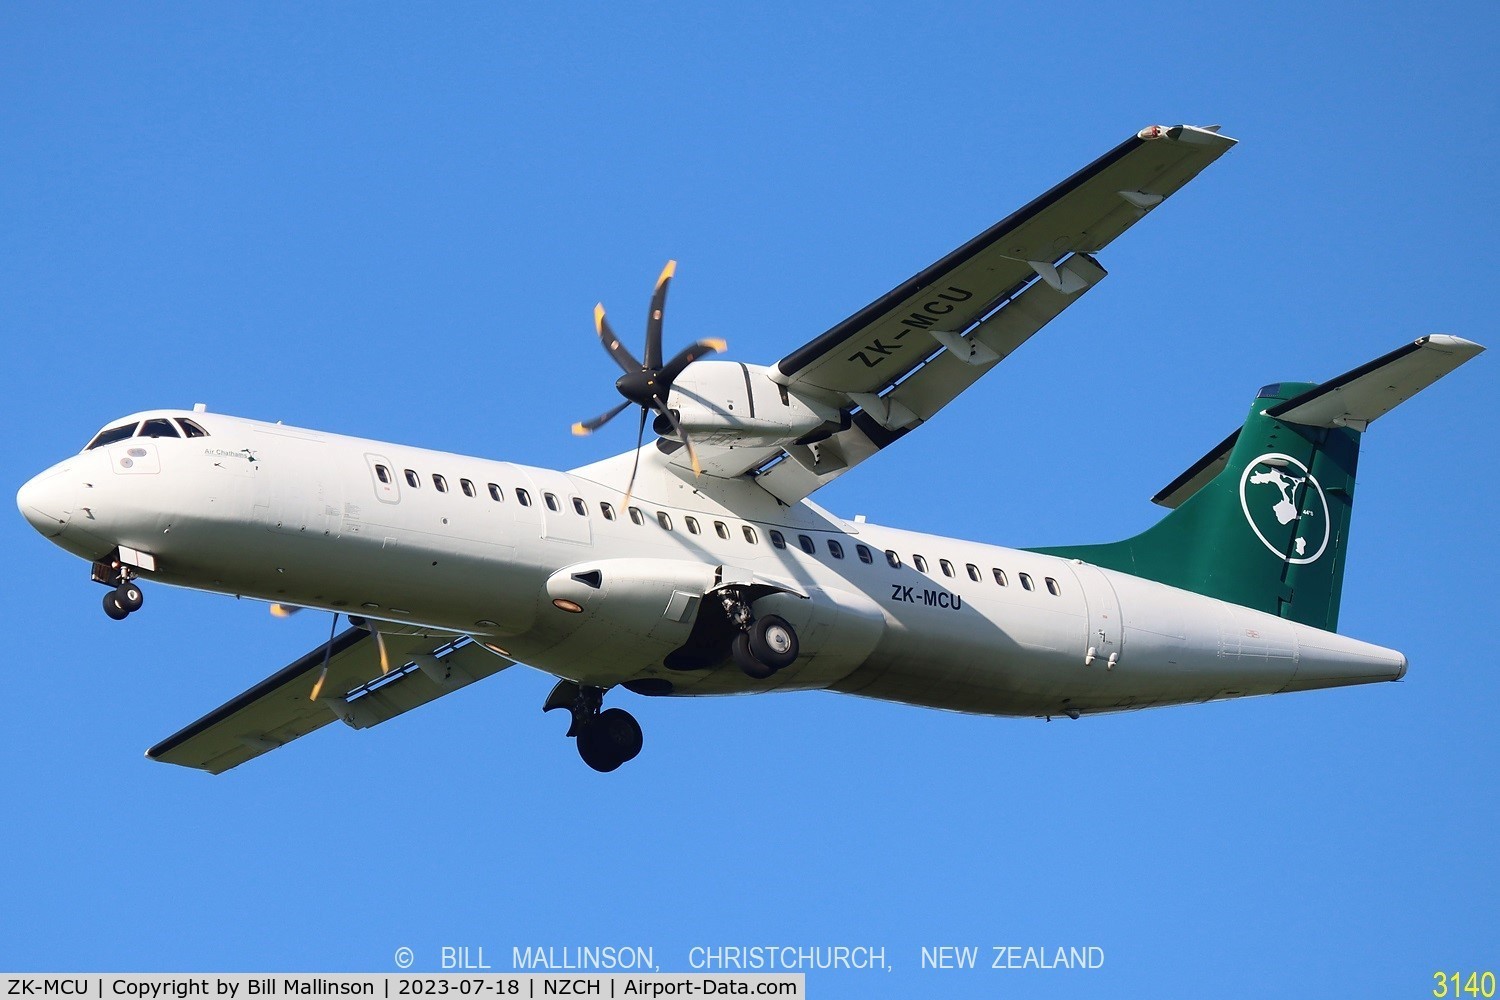 ZK-MCU, 2000 ATR 72-212A C/N 632, FROM THE CHATHAMS